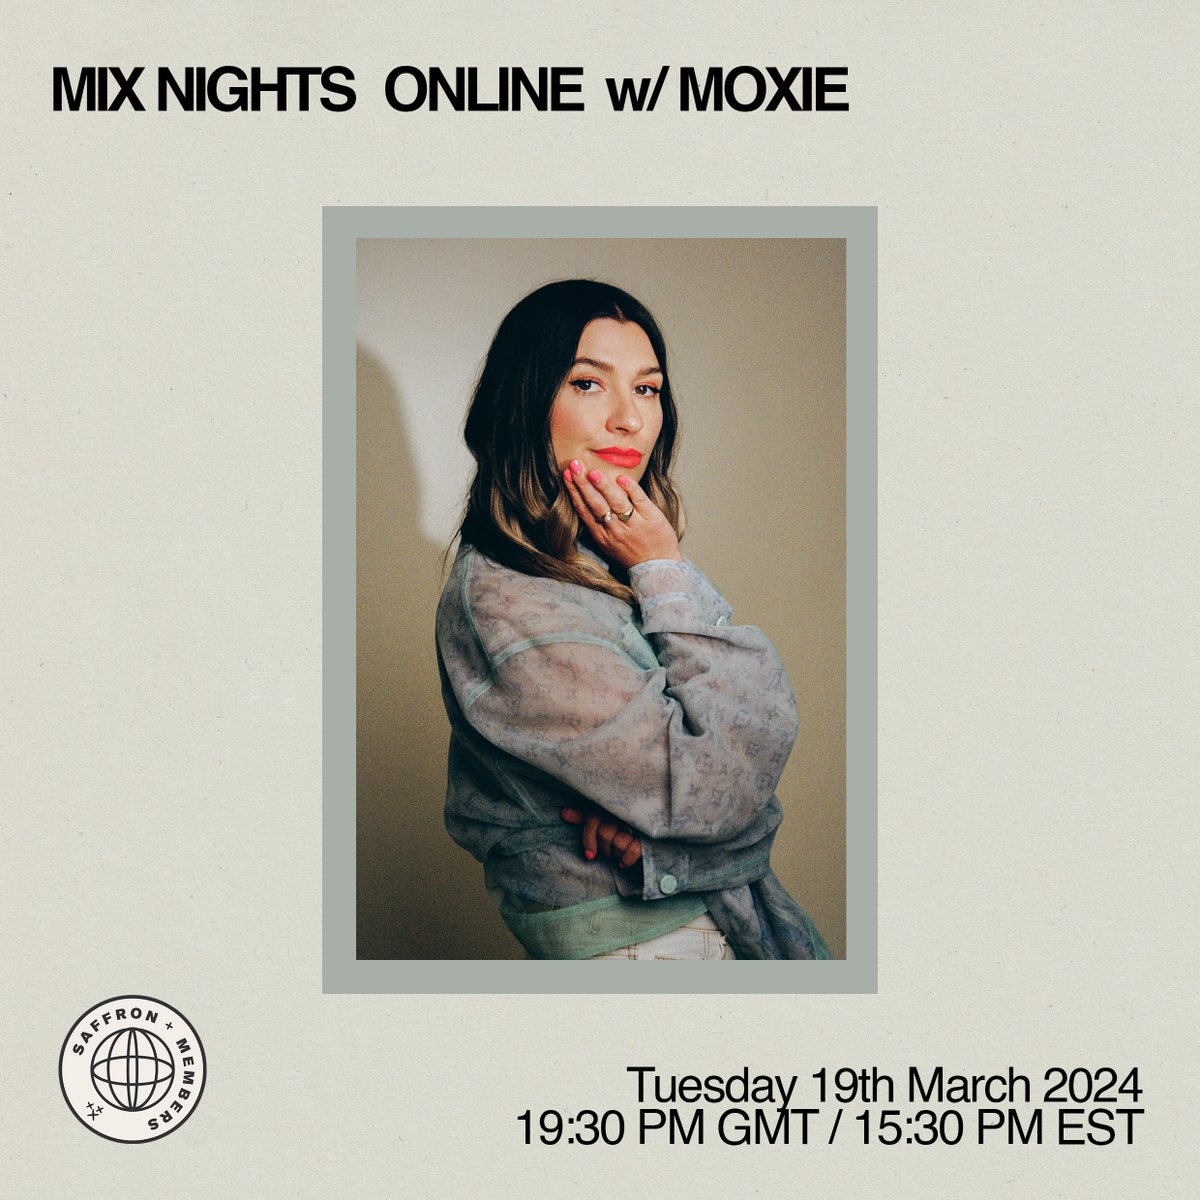 Online workshop: How to structure a radio show w/ @DJMoxie 📻 Join the long-standing @NTSlive resident on to cover: 📝How to write show notes 🗣Tips for speaking on the mic 🎛Pre-mixing vs blending live ⏱When to talk over music More info & signup: tinyurl.com/48bp3efr